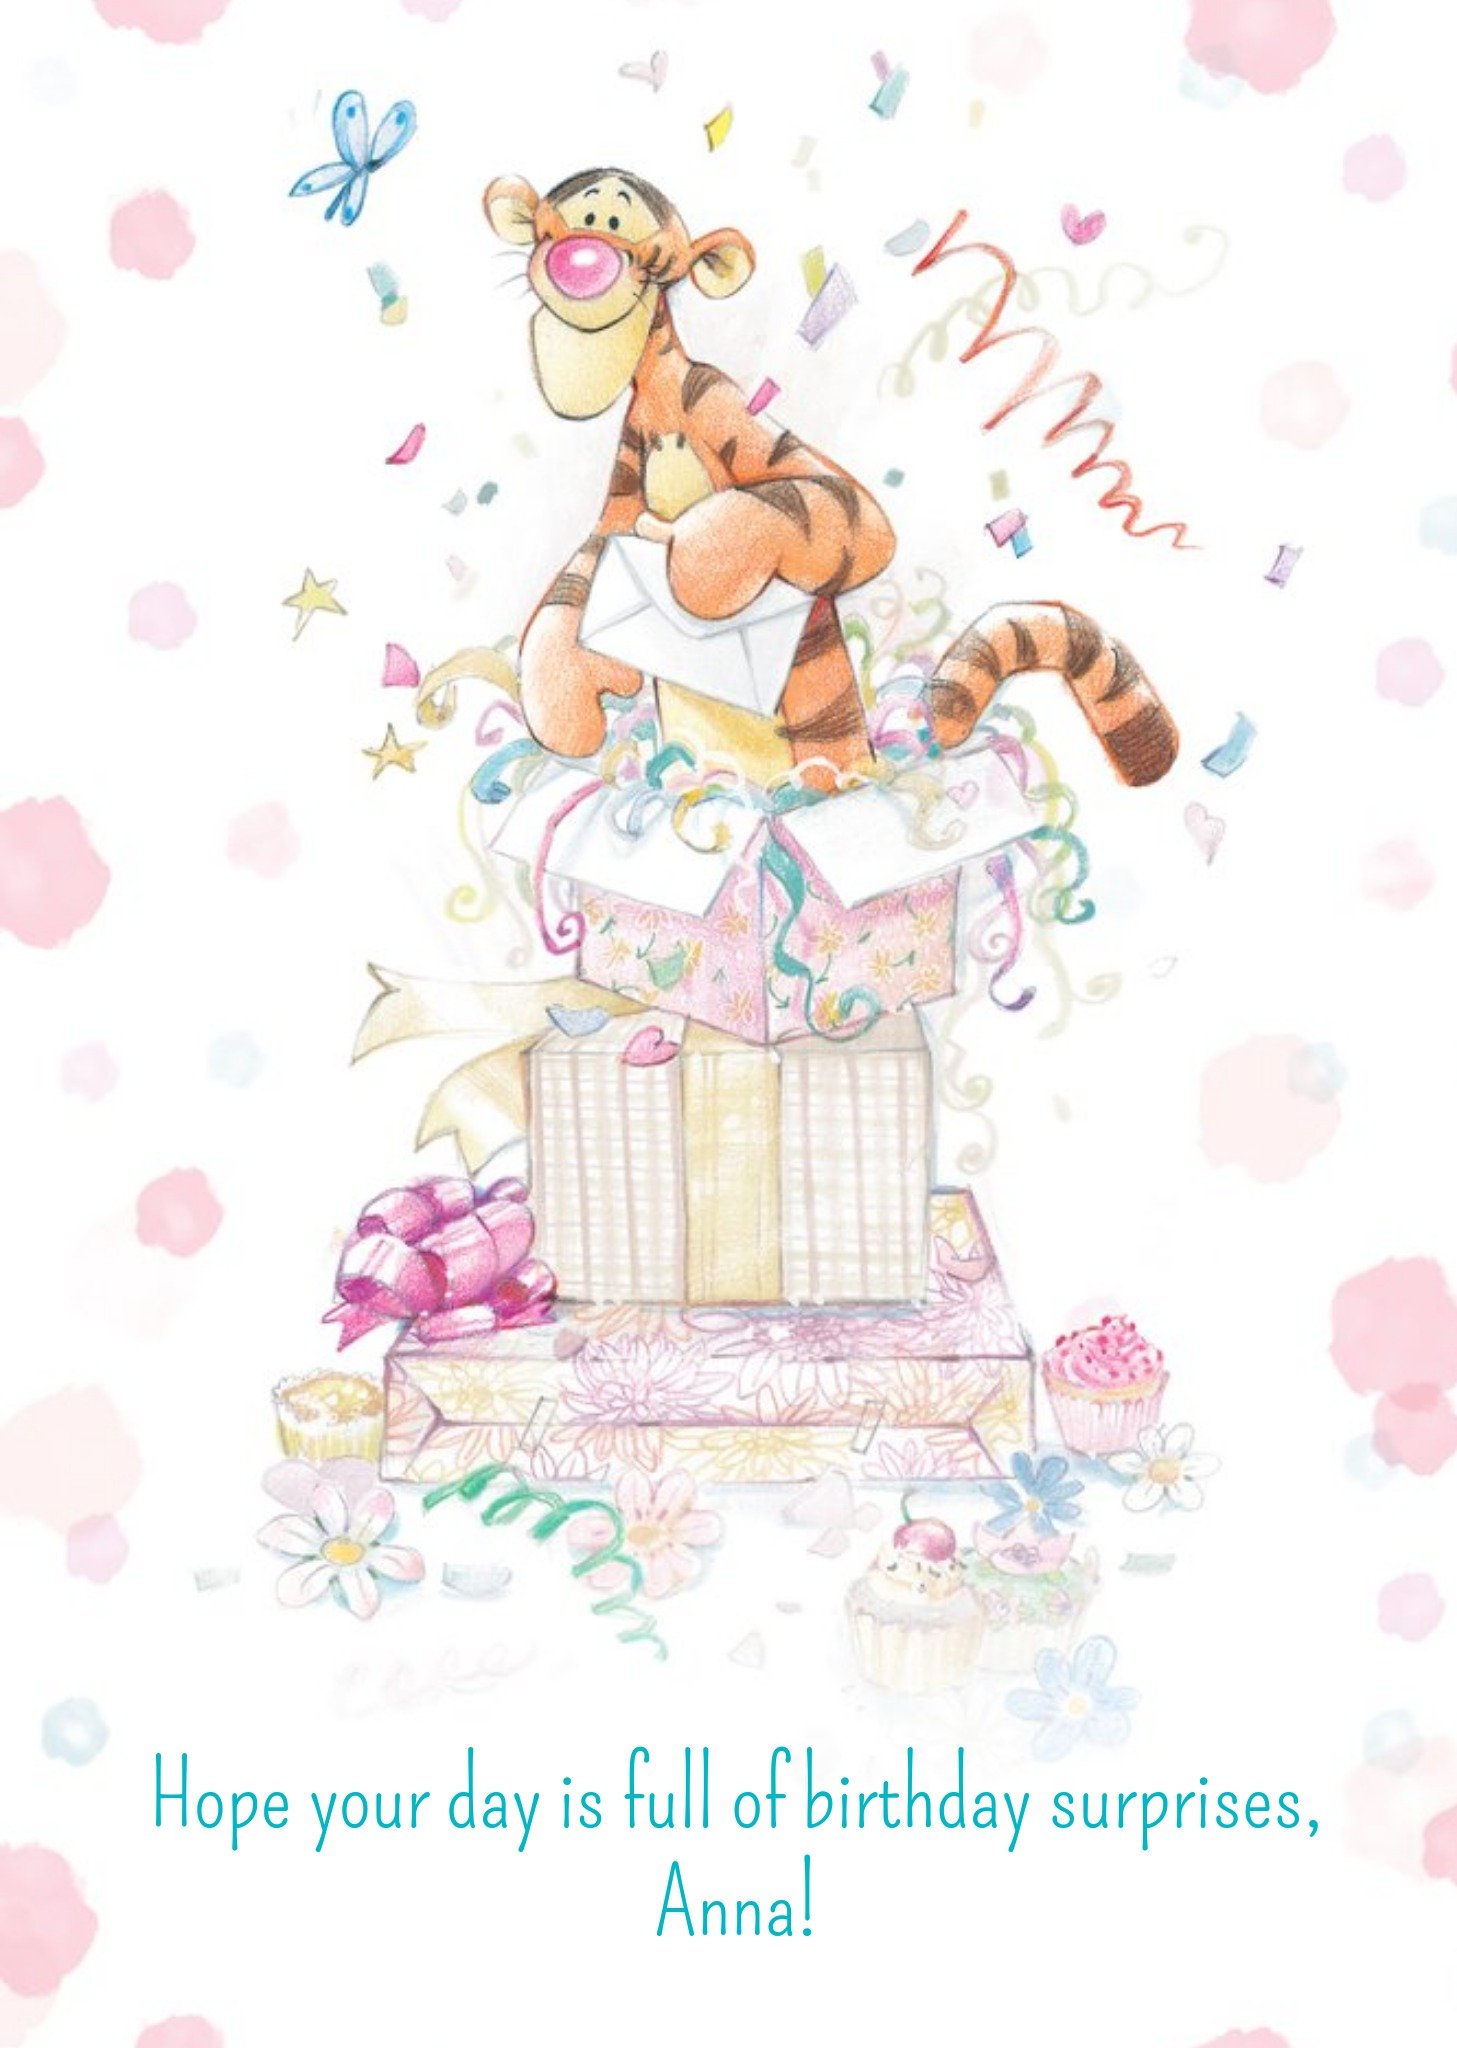 Disney Winnie The Pooh Hope Your Day Is Full Of Surprises Birthday Card, Large